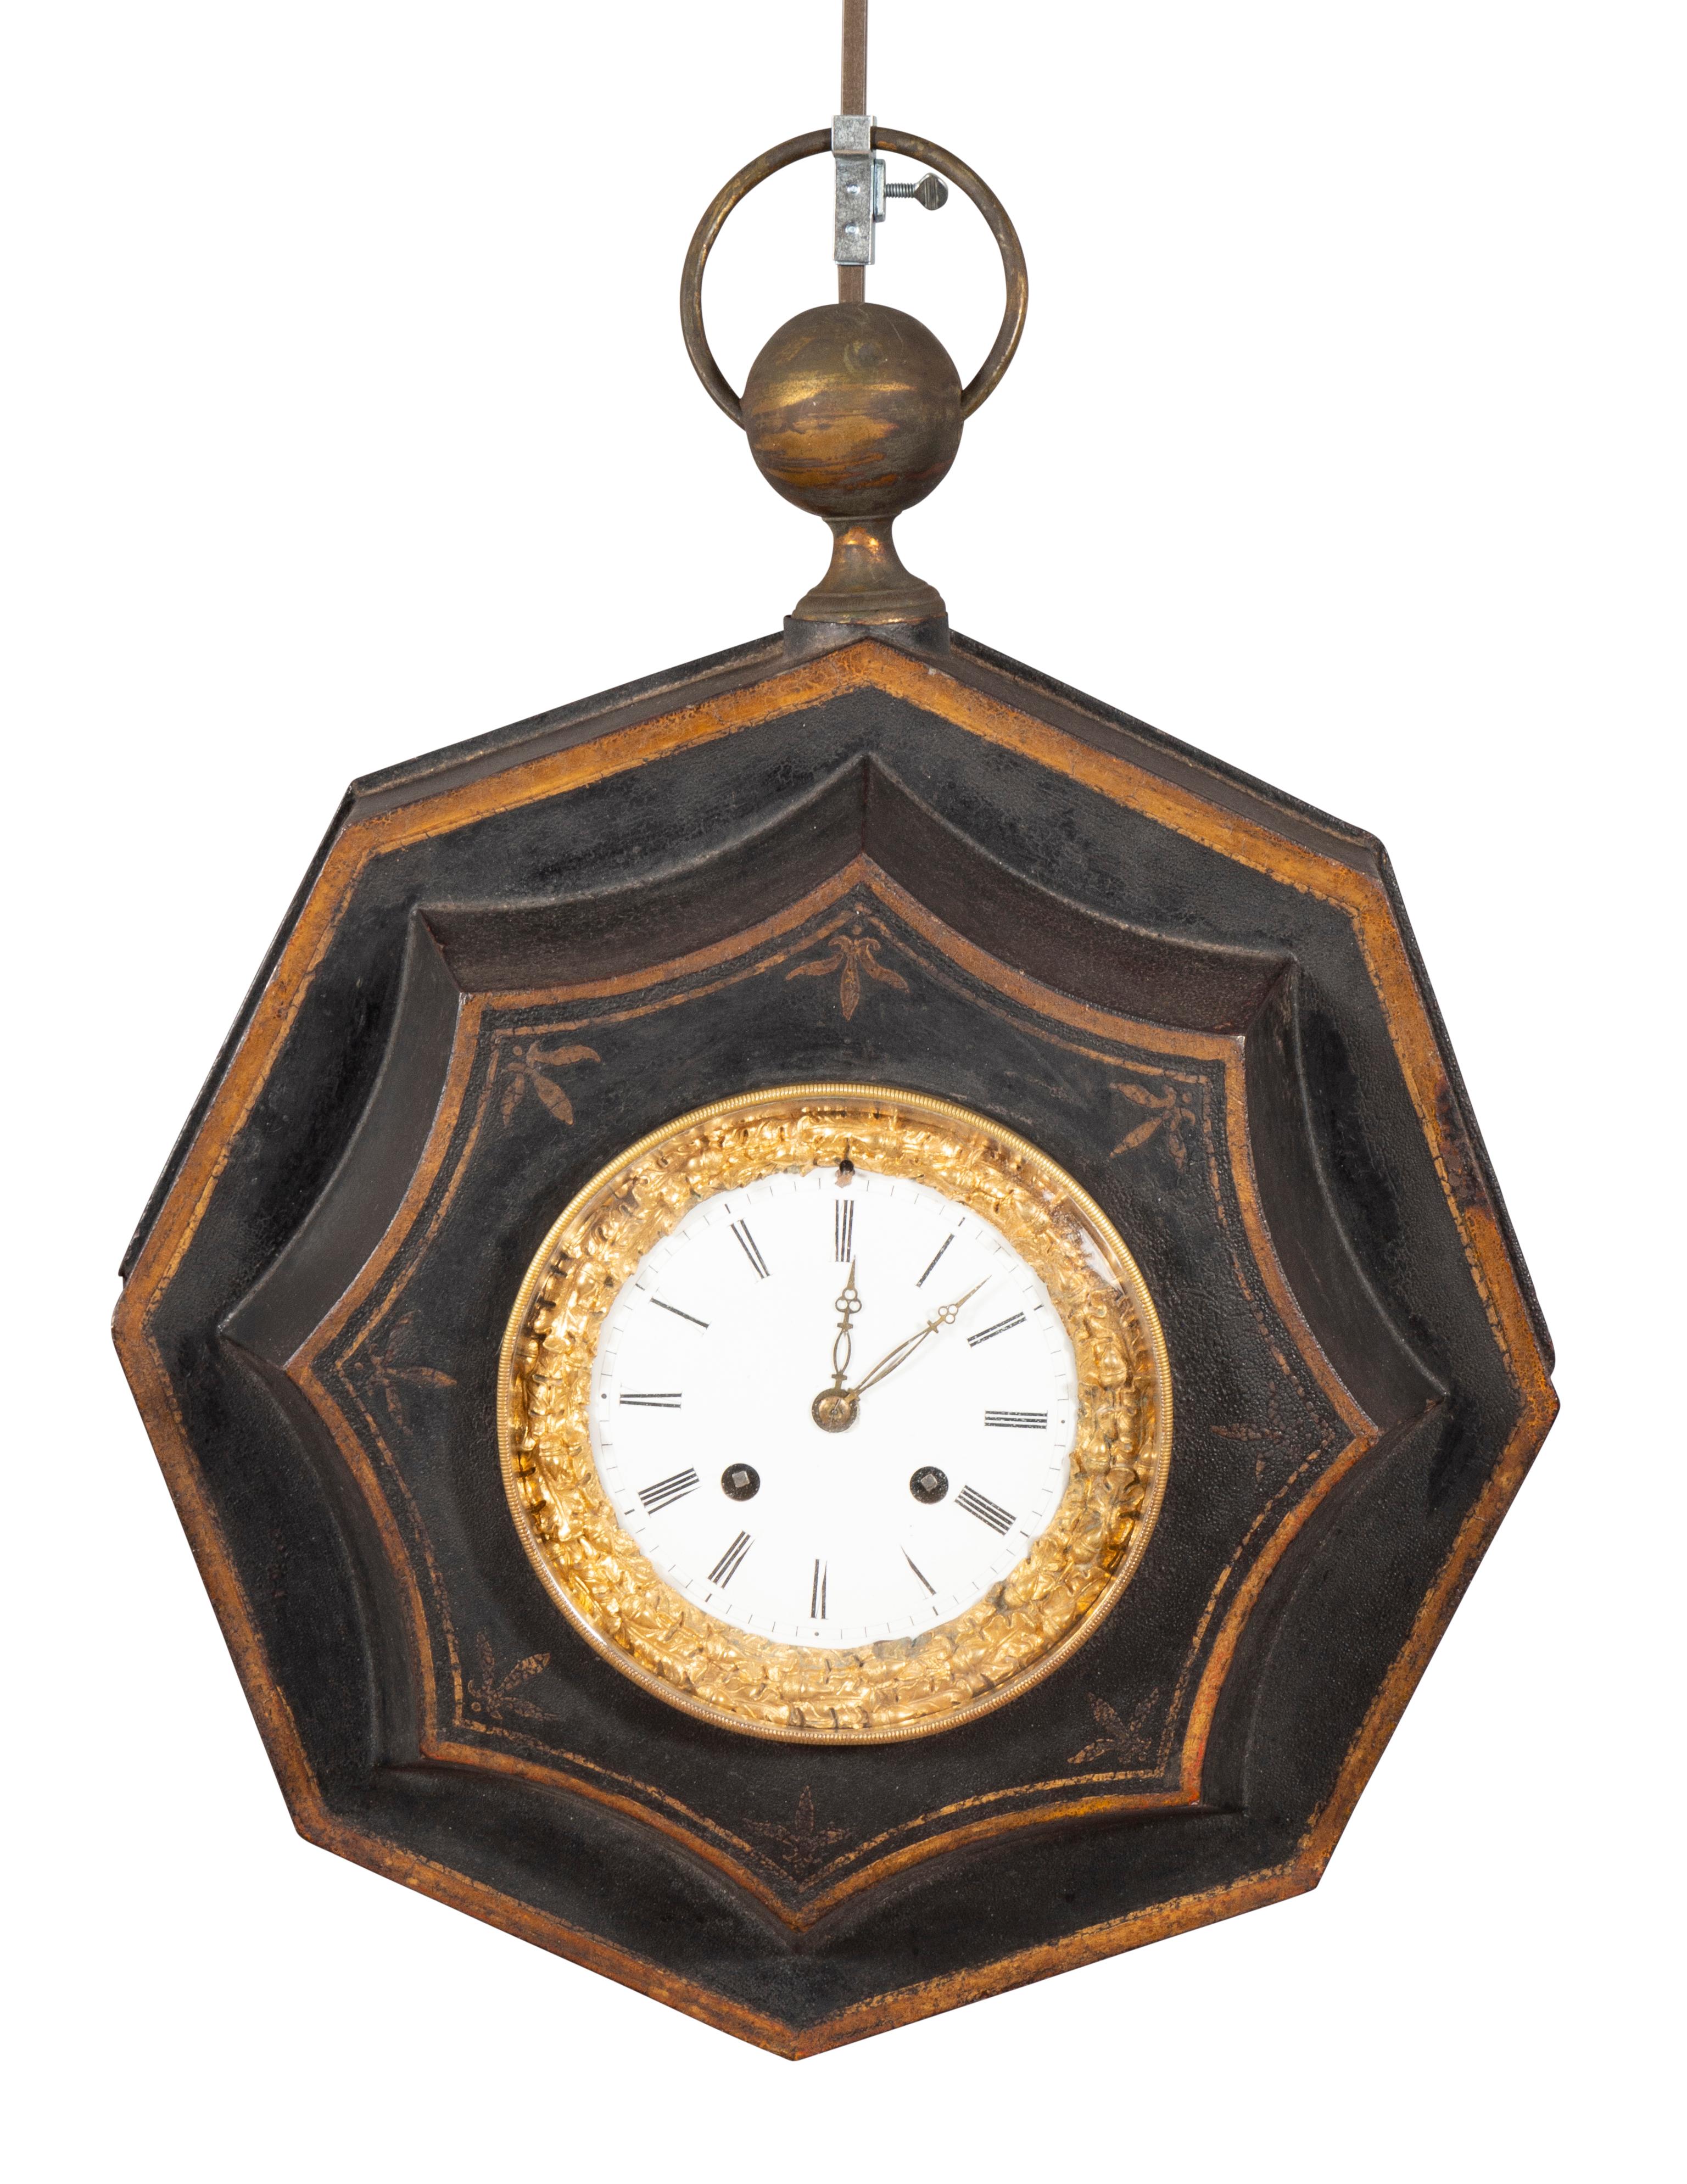 With a white enamel dial and gilt bronze bezel with its original works { currently unknown if it works }   Set in a black octagonal tole case with gilt details. Ring handle.